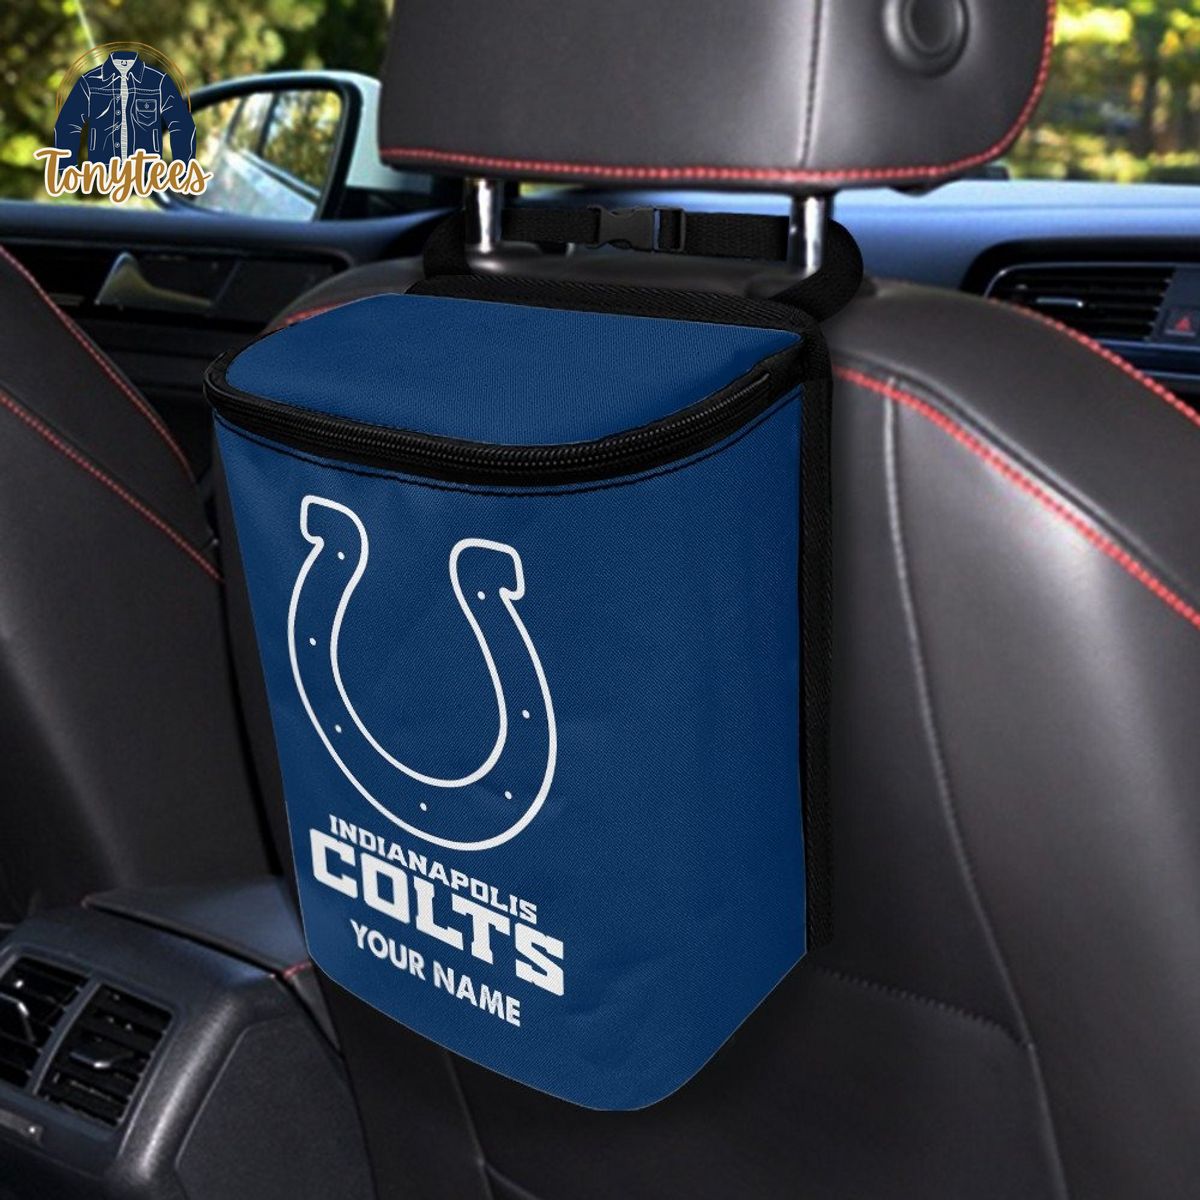 NFL Indianapolis Colts Personalized Car Trash Bag